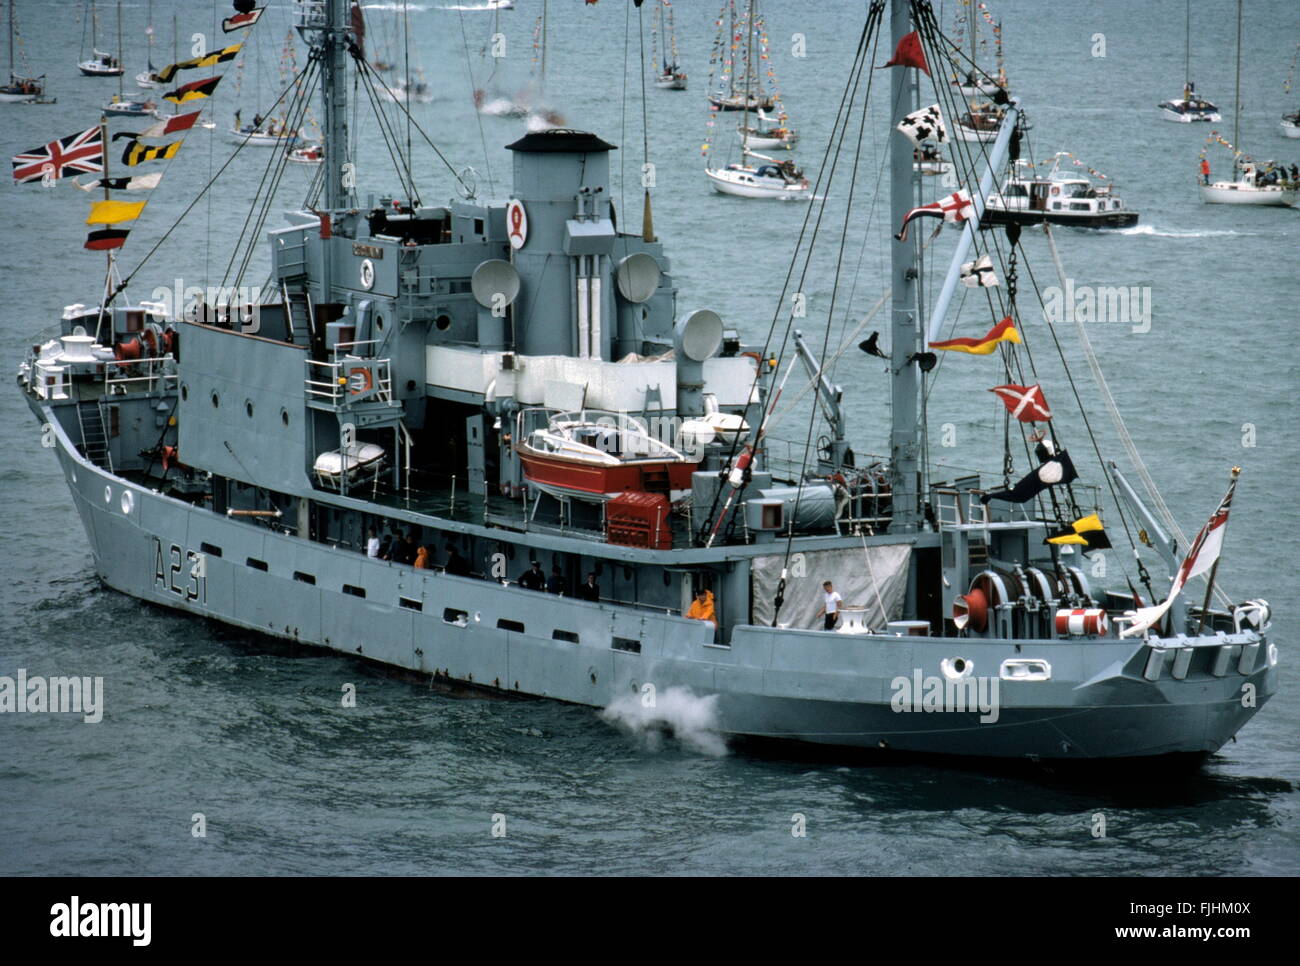 AJAXNETPHOTO. 25TH JUNE, 1977. PORTSMOUTH, ENGLAND. - LAST NAVY SAILING SHIP - H.M.S. RECLAIM, THE ROYAL NAVY'S DIVING SUPPORT SHIP, LEAVING HARBOUR TO TAKE UP HER SILVER JUBILEE FLEET REVIEW POSITION AT SPITHEAD.   PHOTO:JONATHAN EASTLAND/AJAX  REF:909234. Stock Photo